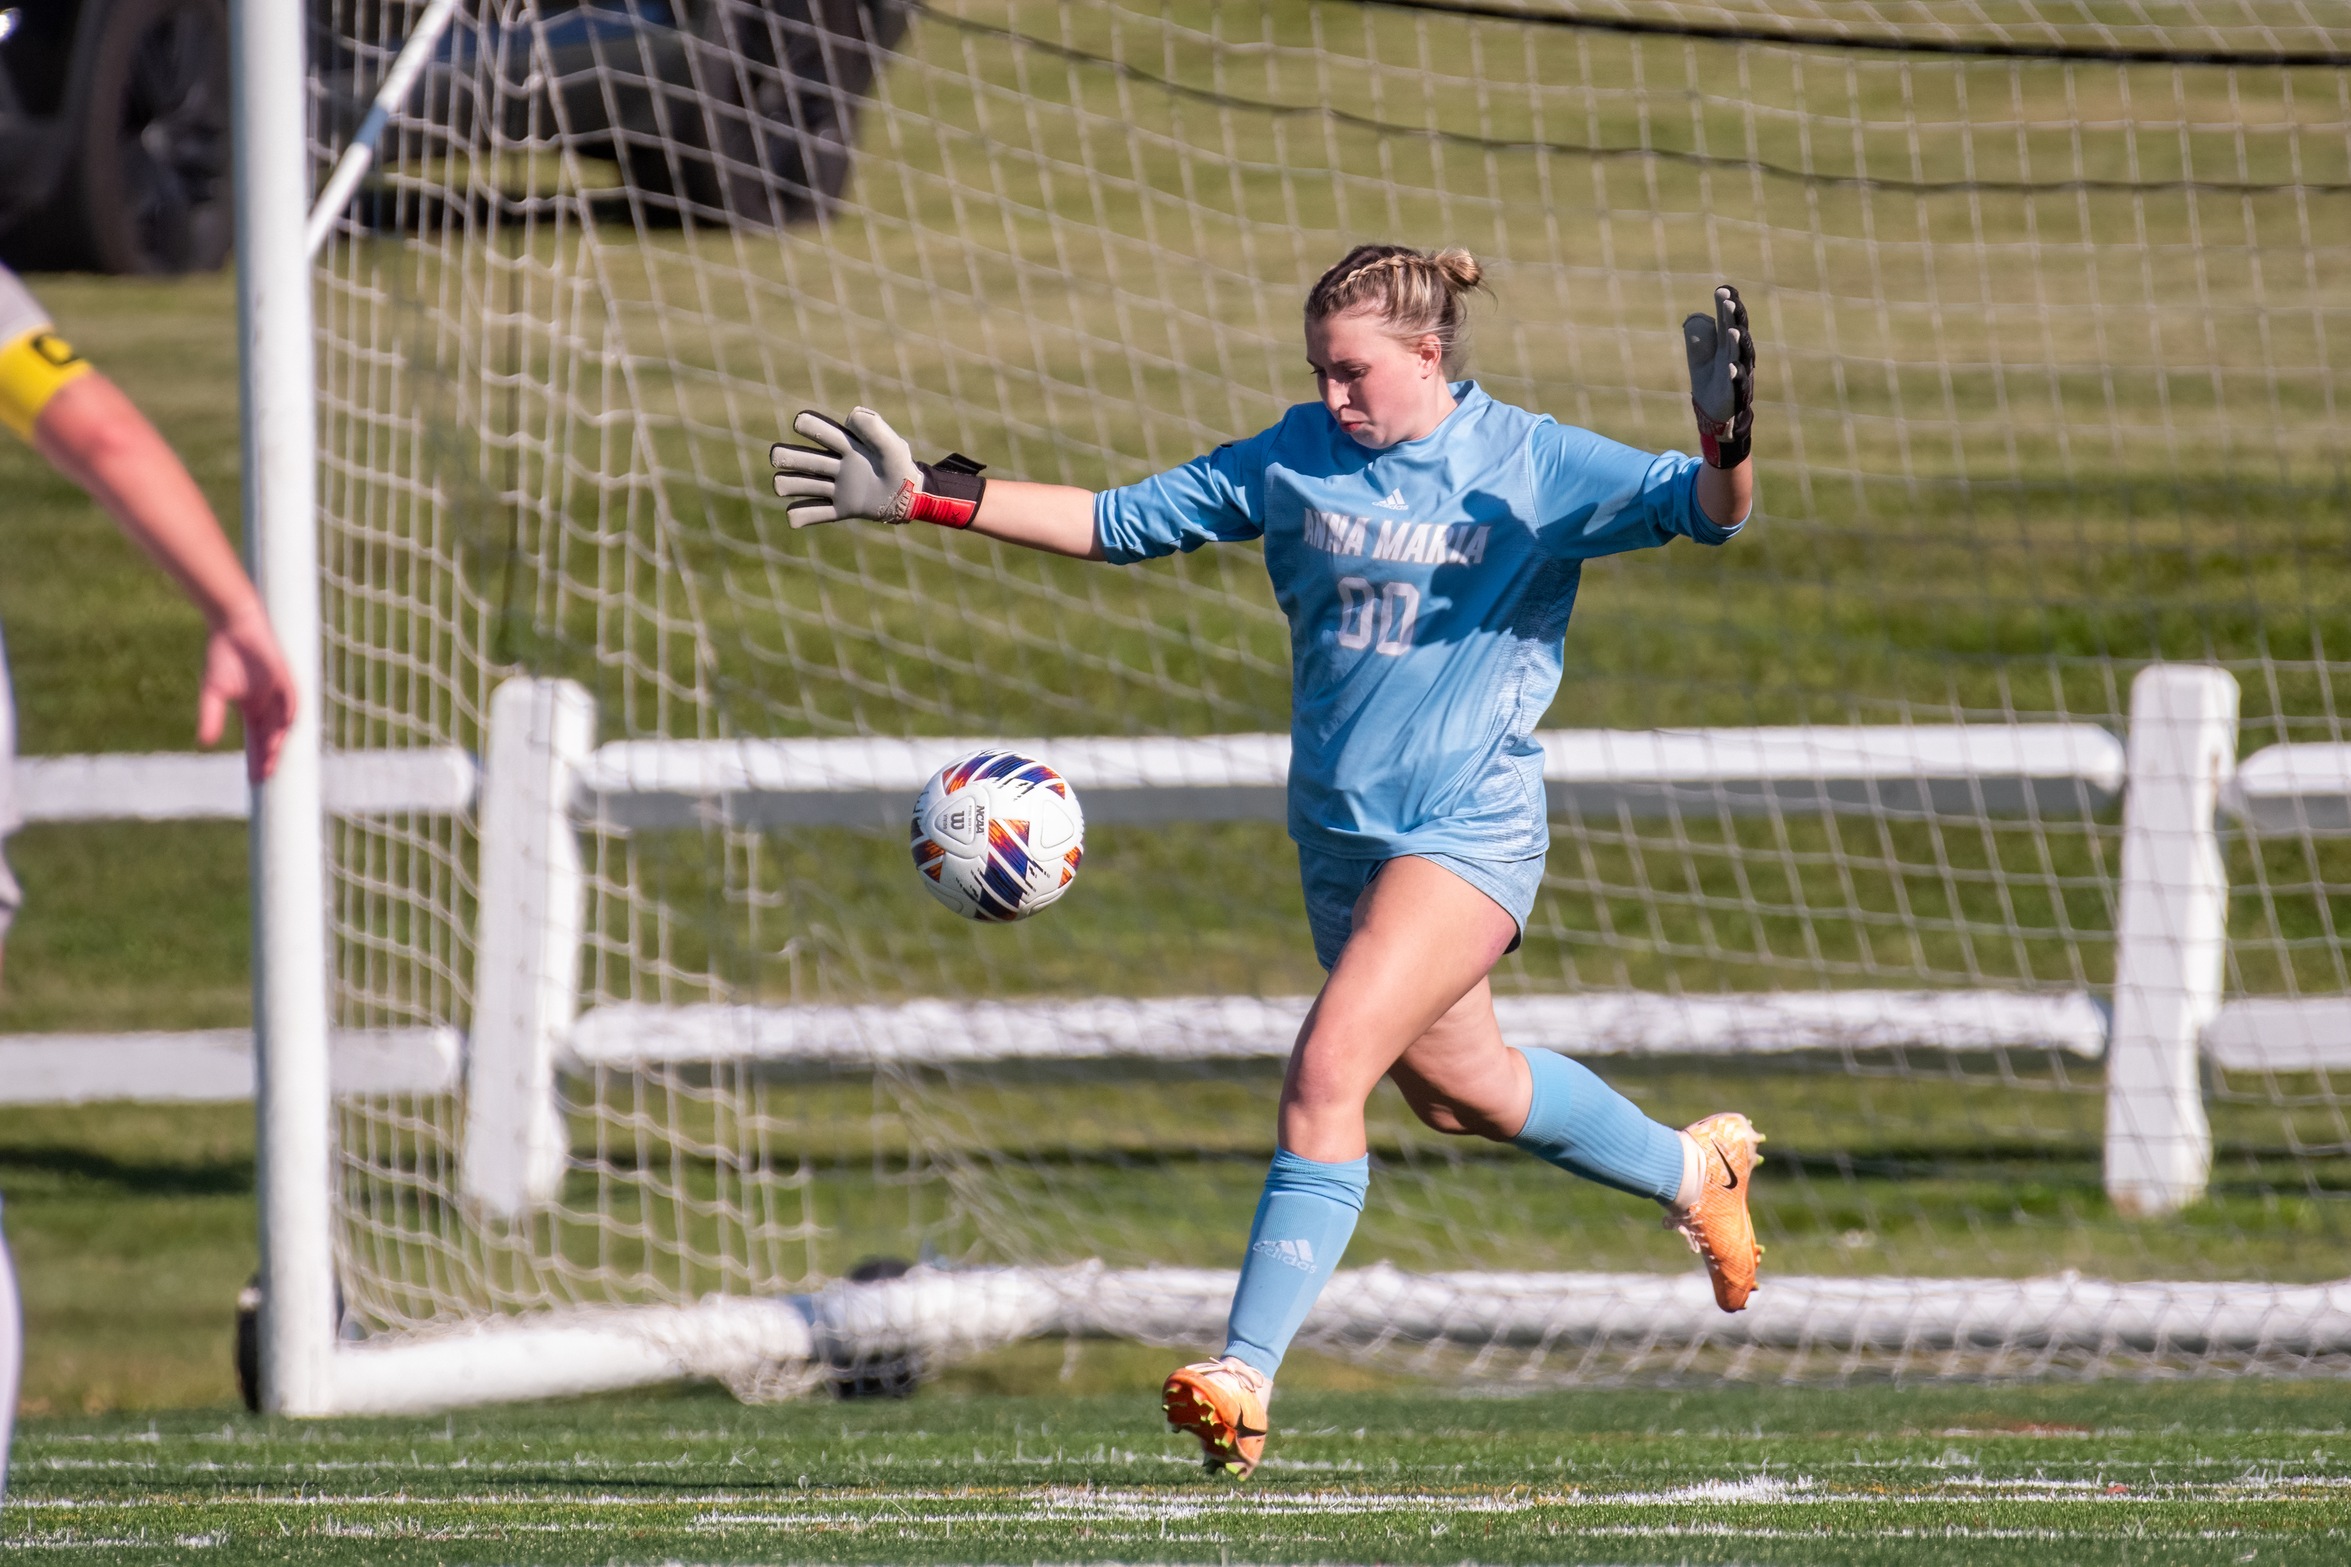 Colby-Sawyer Charges Passed Women’s Soccer 4-0